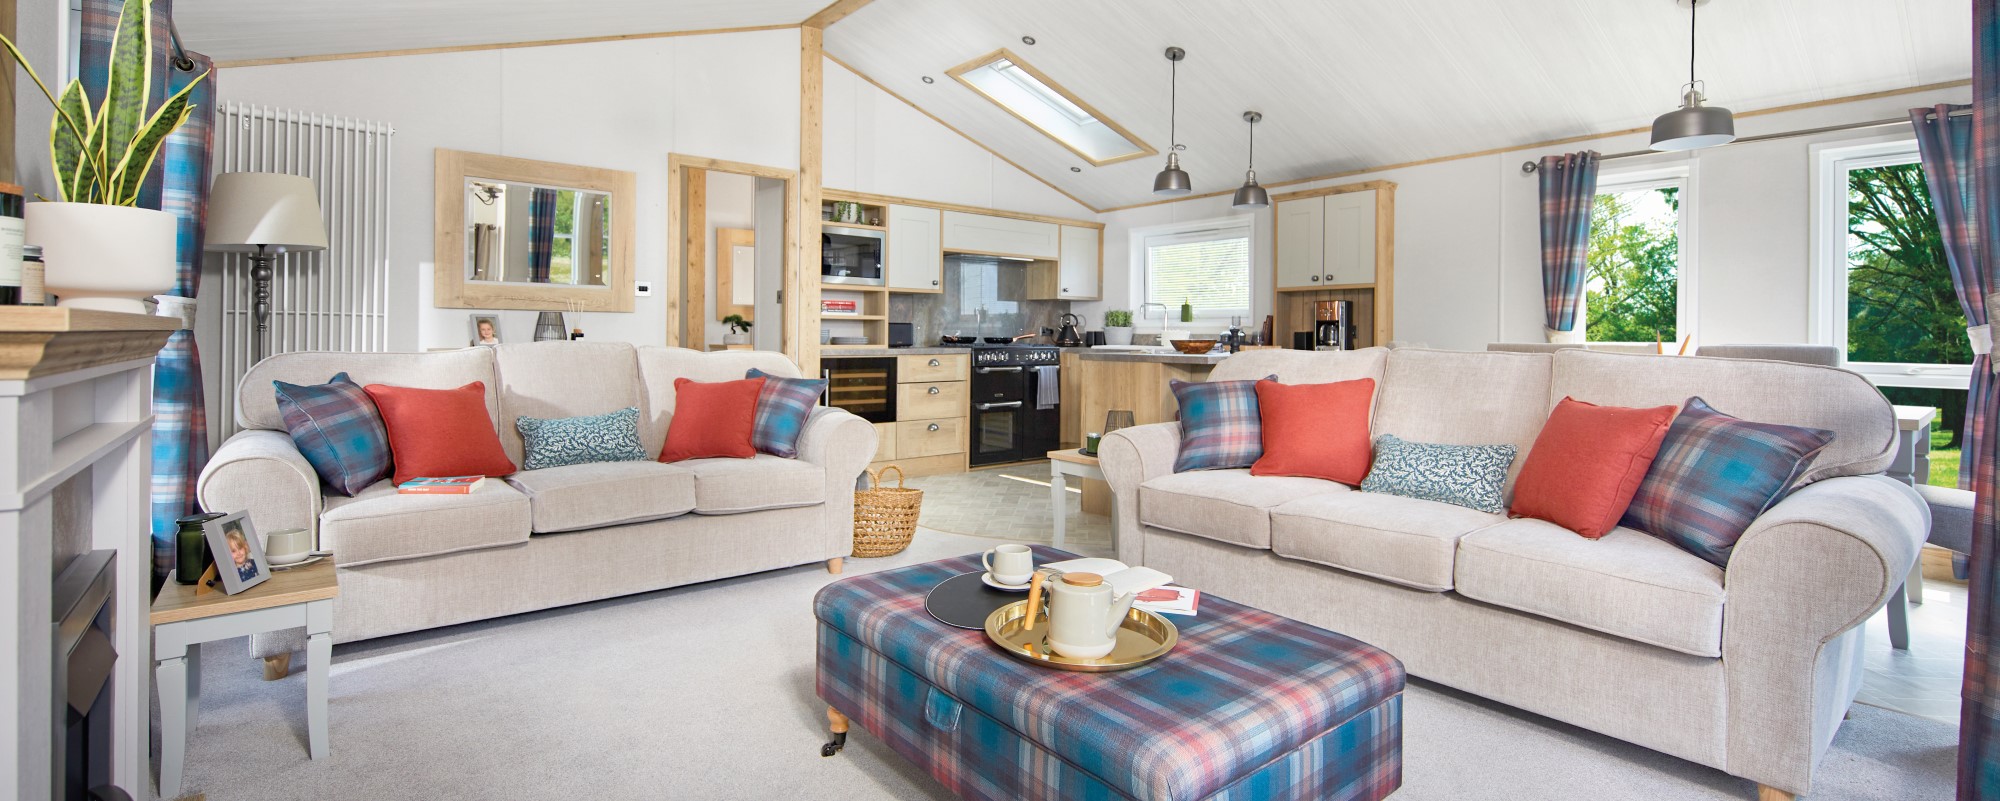 Buy a holiday home in Yorkshire